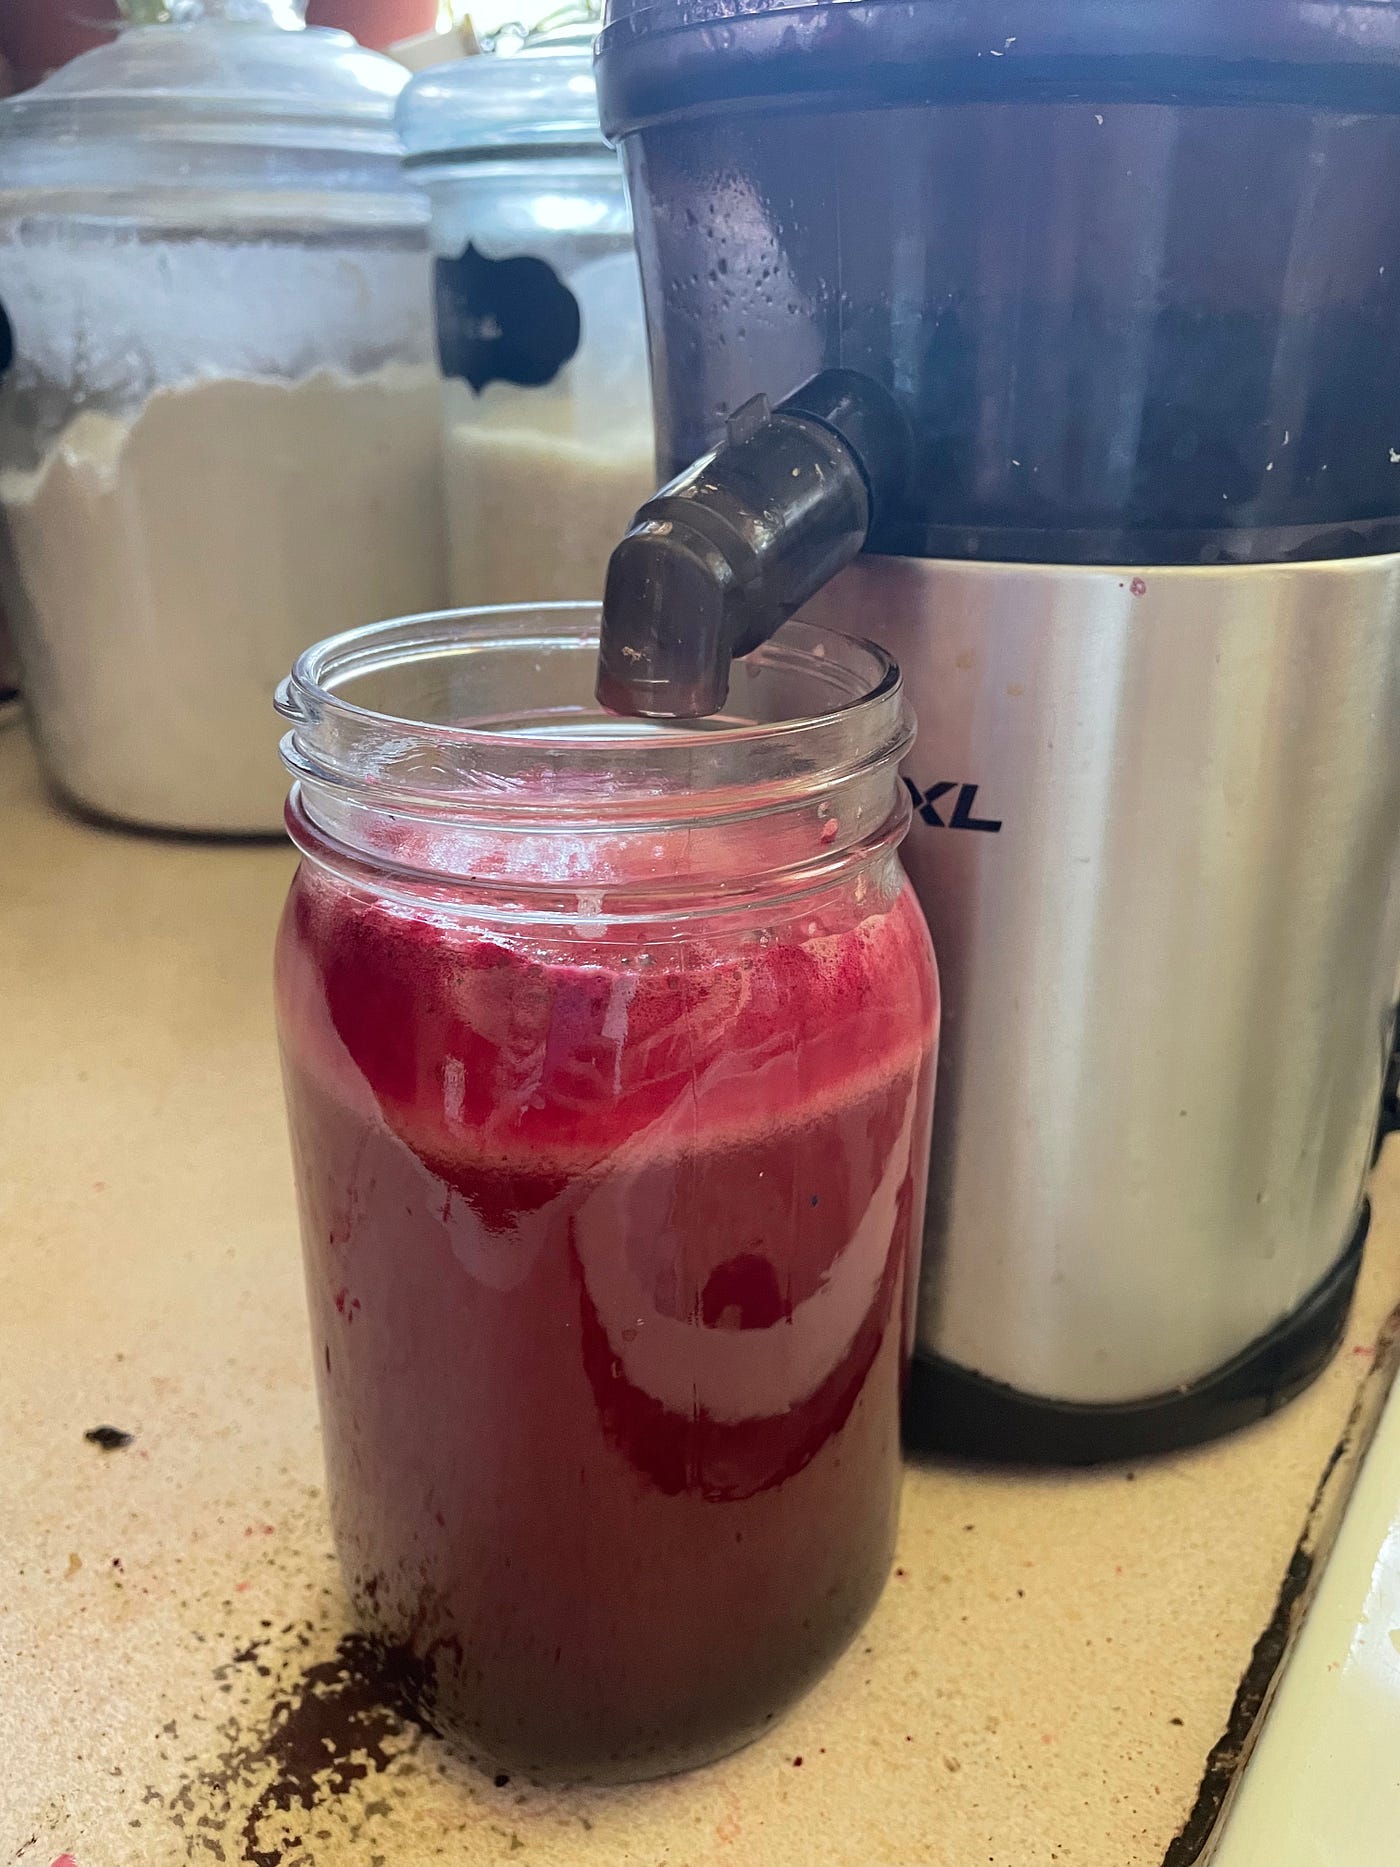 A close up view of juice coming out of the juicer into a glass.